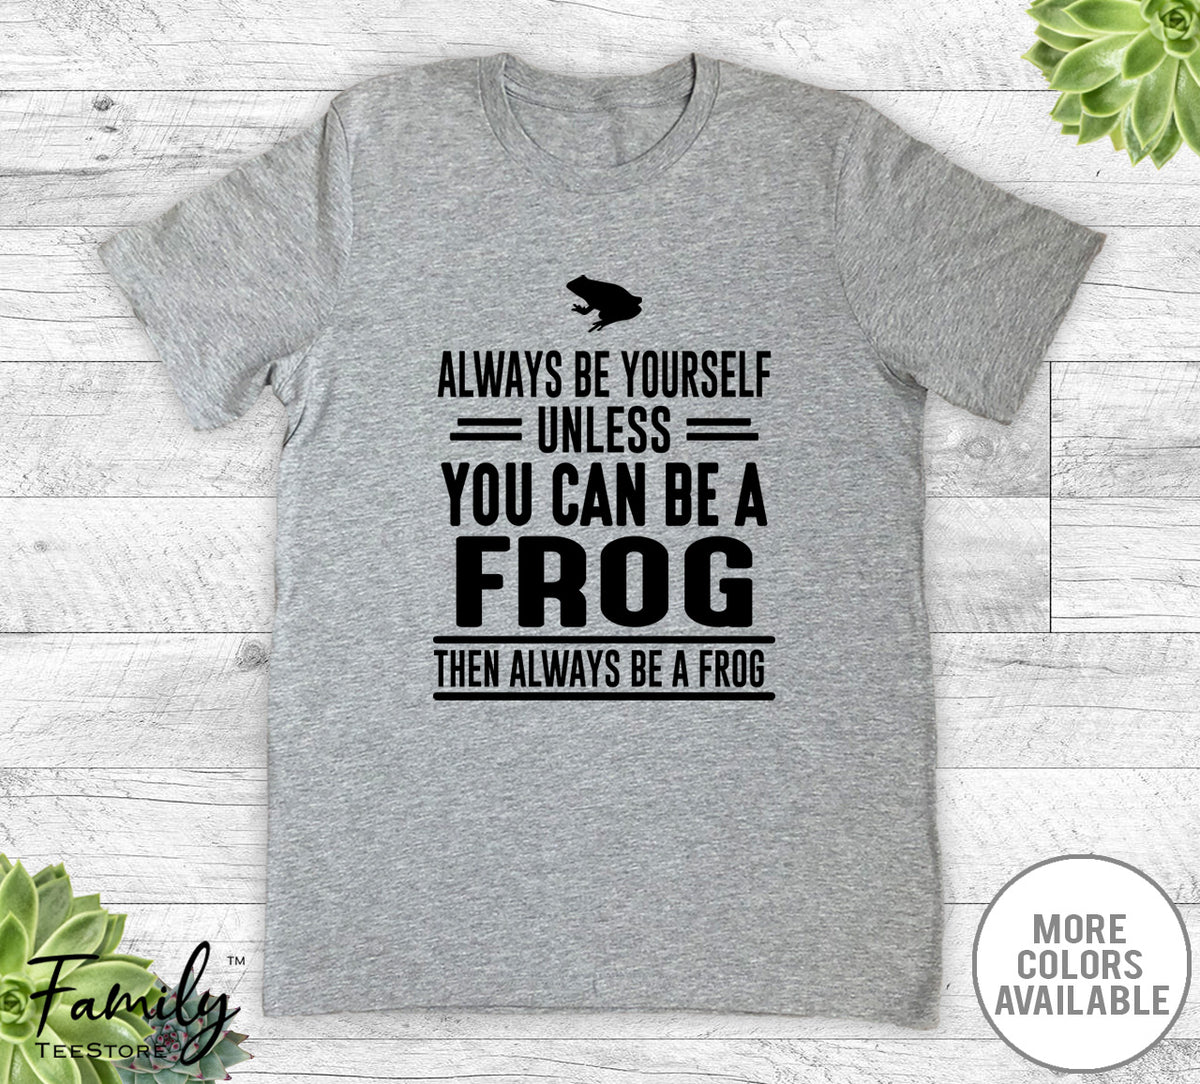 Always Be Yourself Unless You Can Be A Frog - Unisex T-shirt - Frog Shirt - Frog Gift - familyteeprints